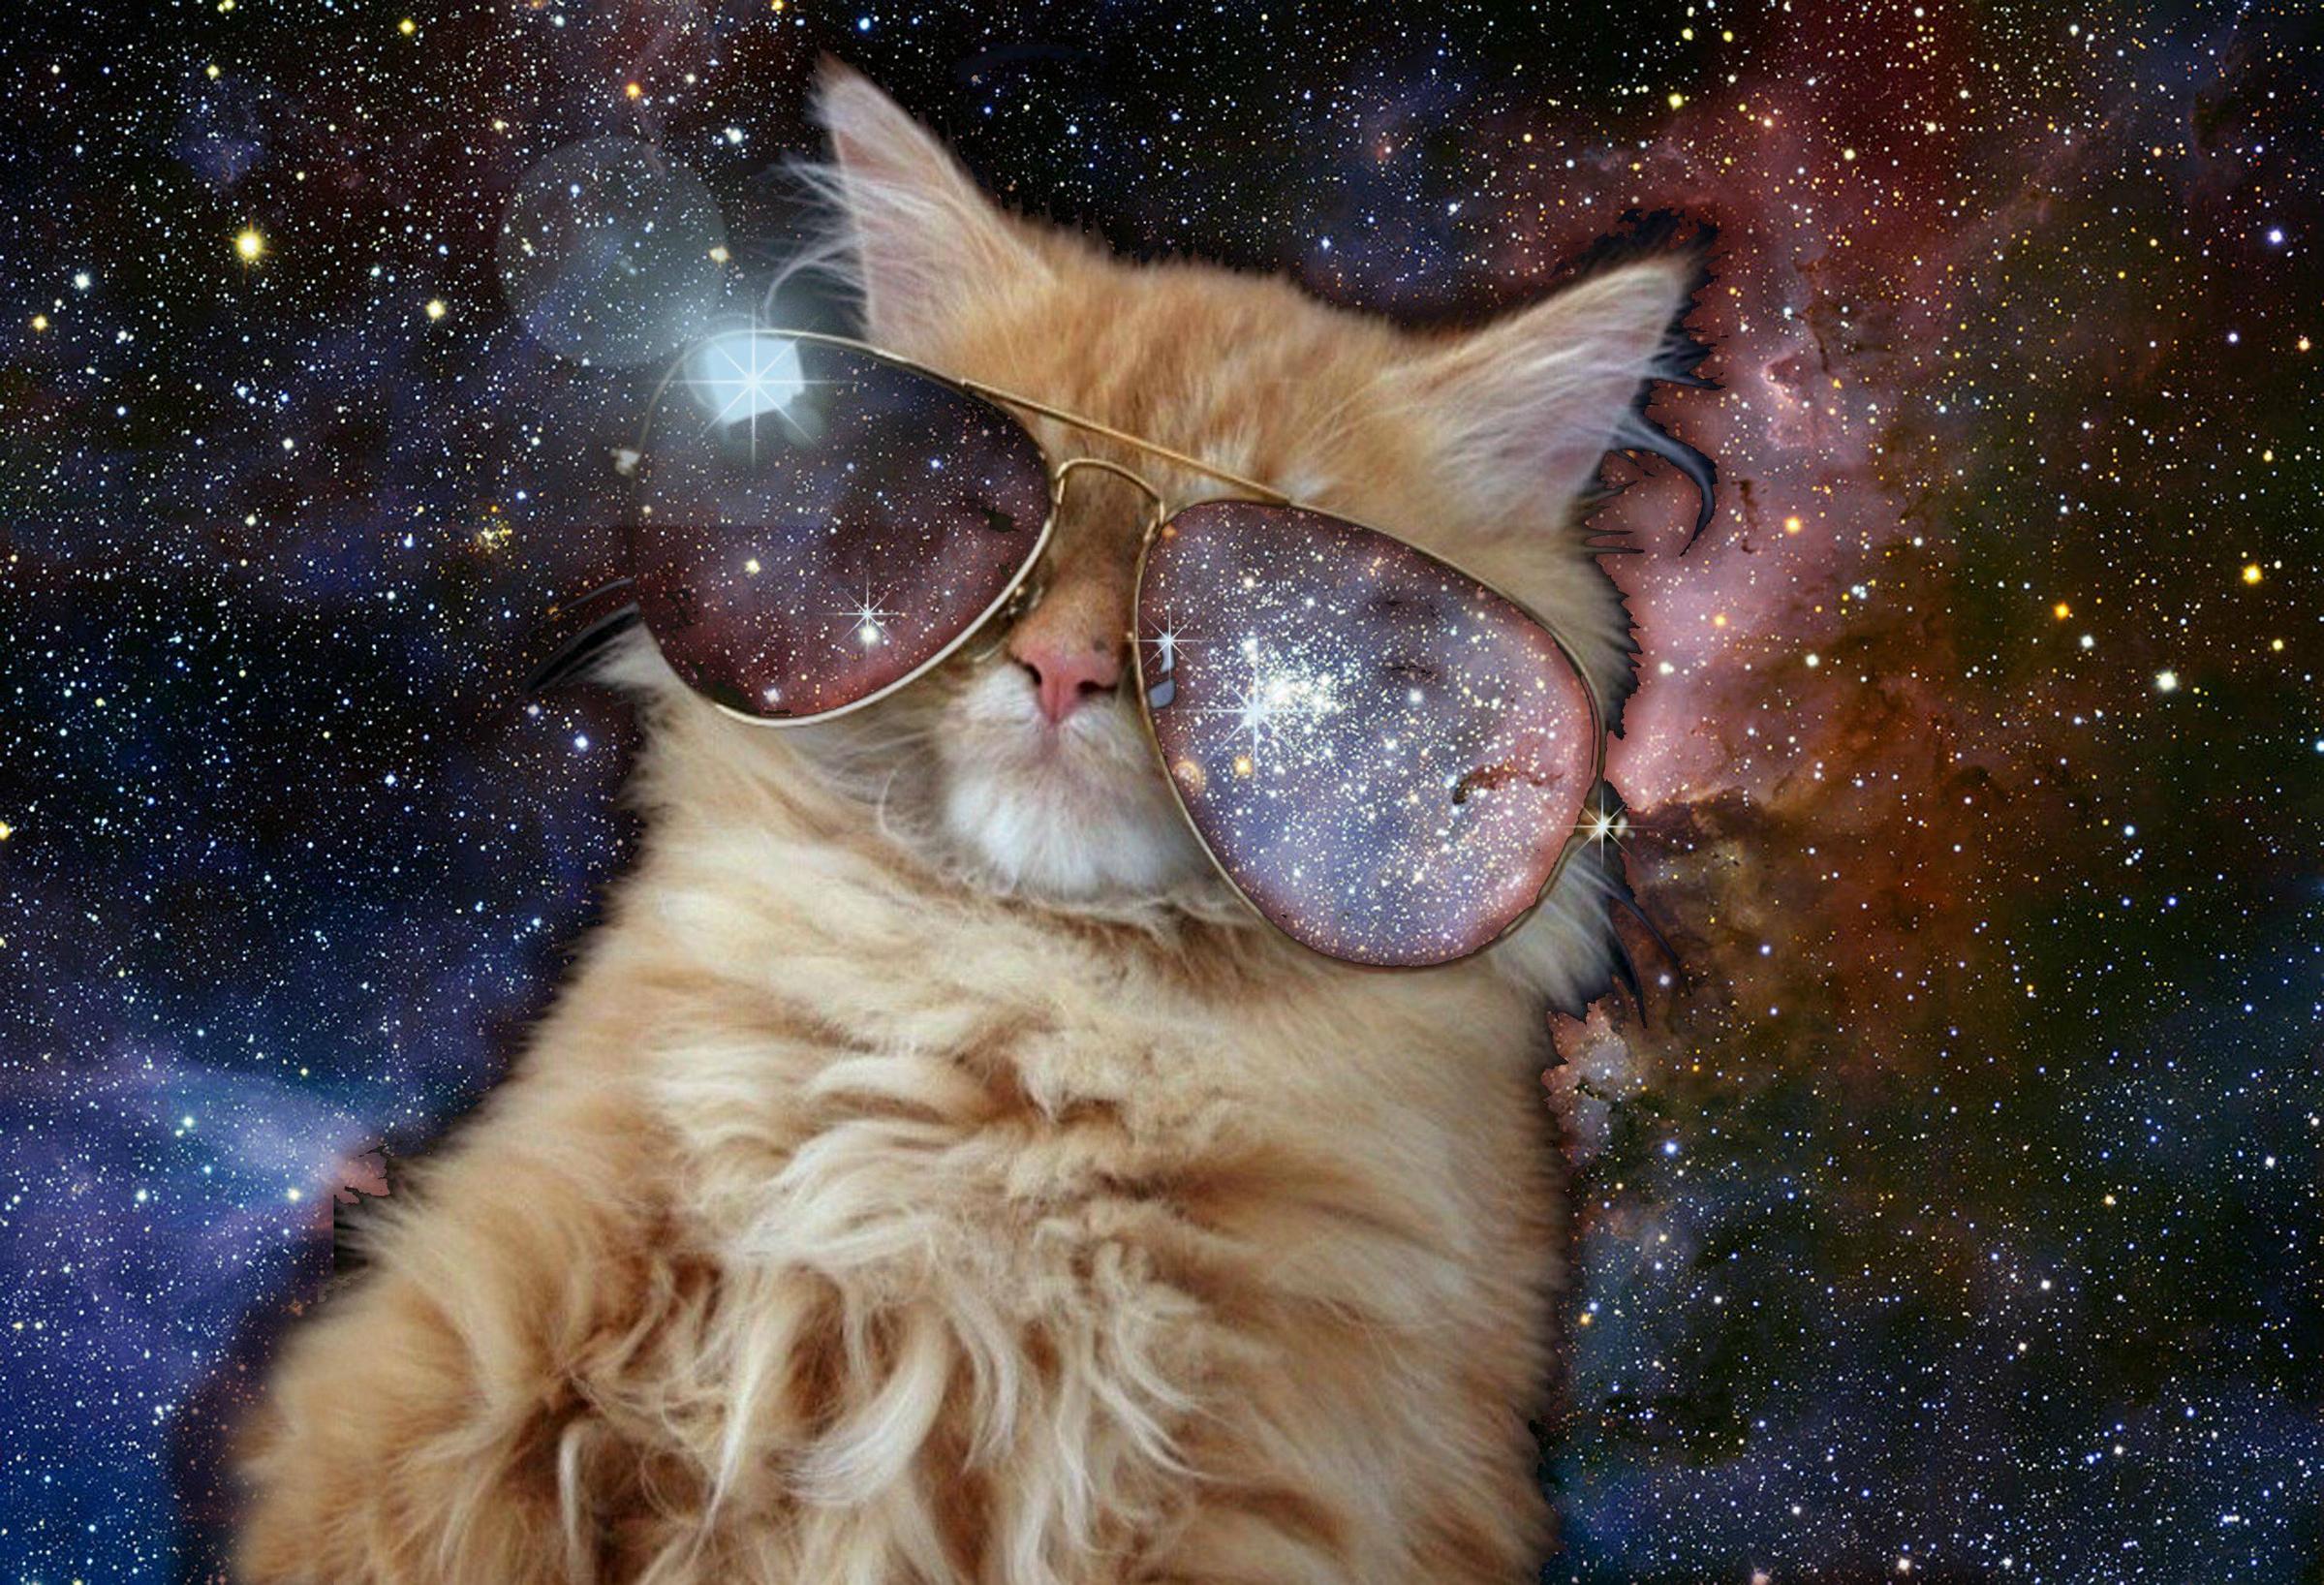  Awesome Cats In Space Wallpapers   Caveman Circus Caveman Circus 2399x1636